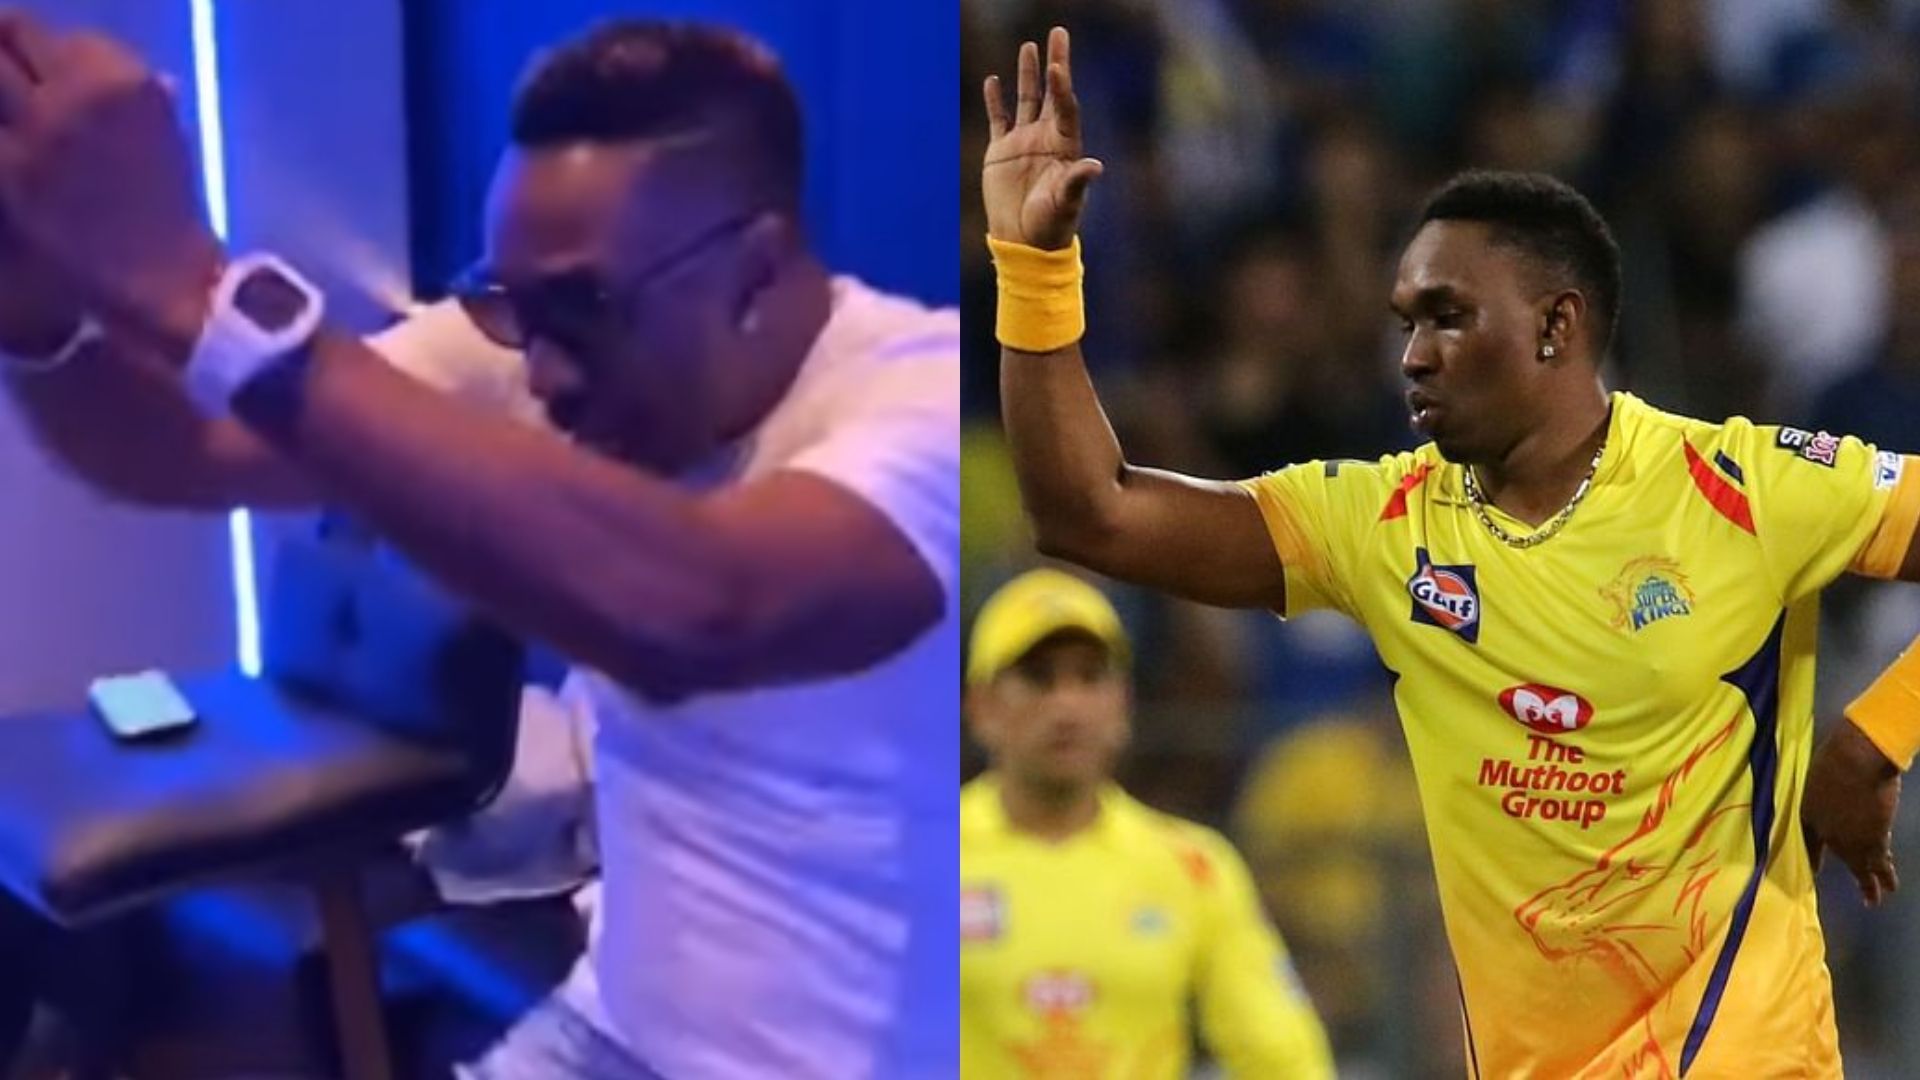 Dwayne Bravo was bought back by the Chennai Super Kings at the 2022 IPL auction